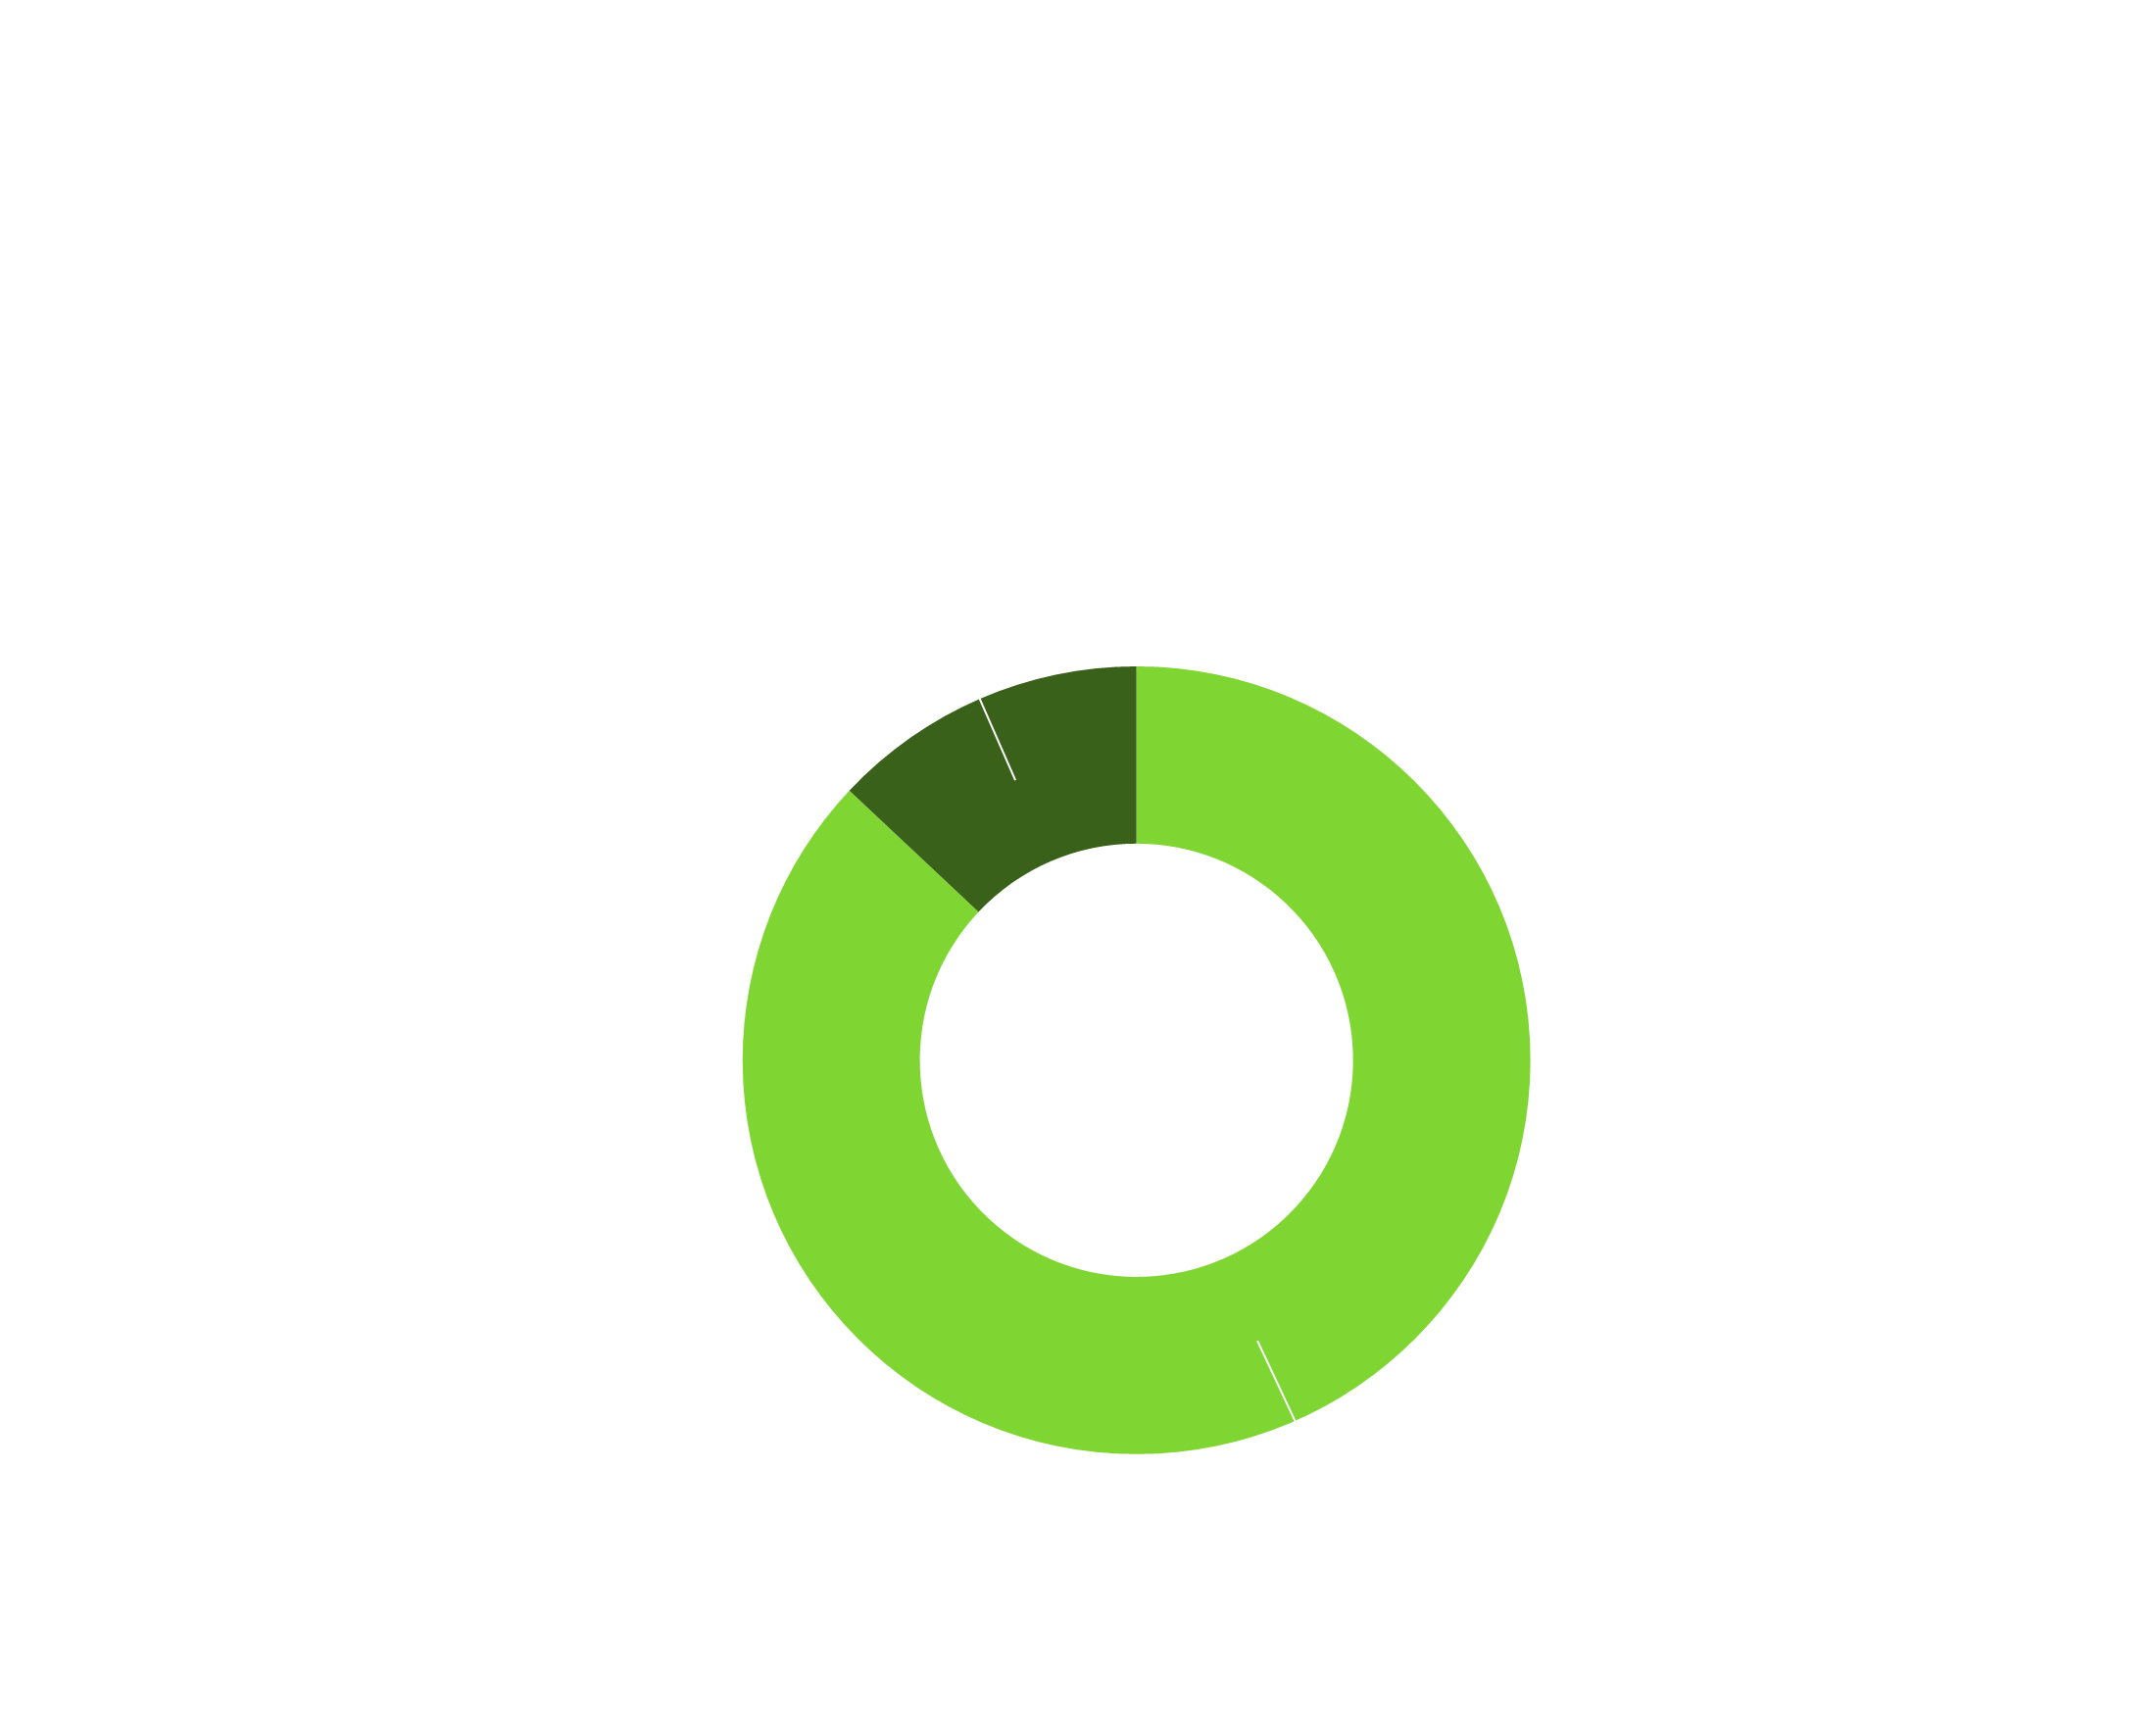 Donut chart of Transit Transportation Investment Fund Revenue FY 2023 showing Sales Tax 13% and General Fund one-time 86%